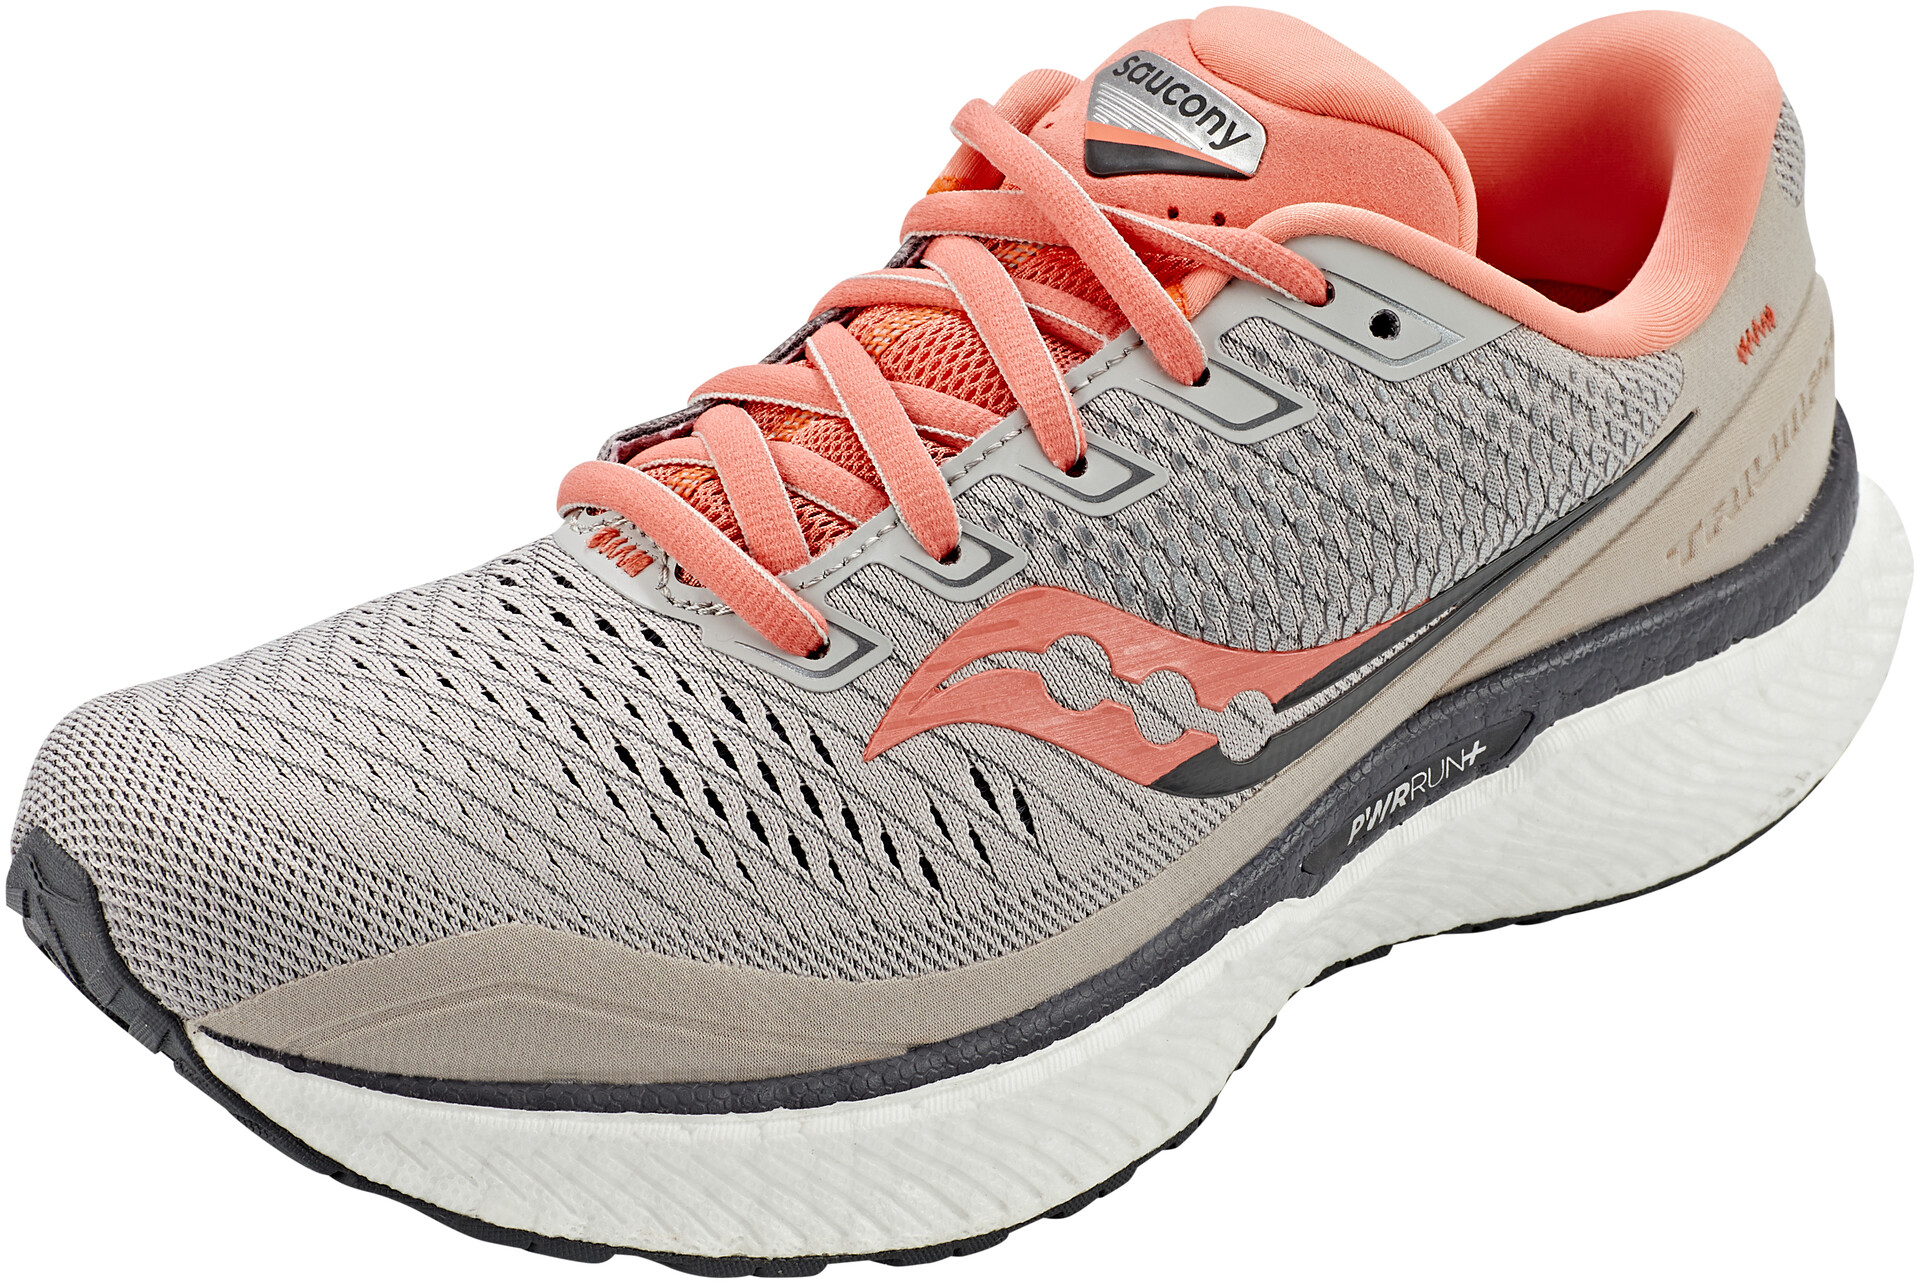 saucony sneakers femme or